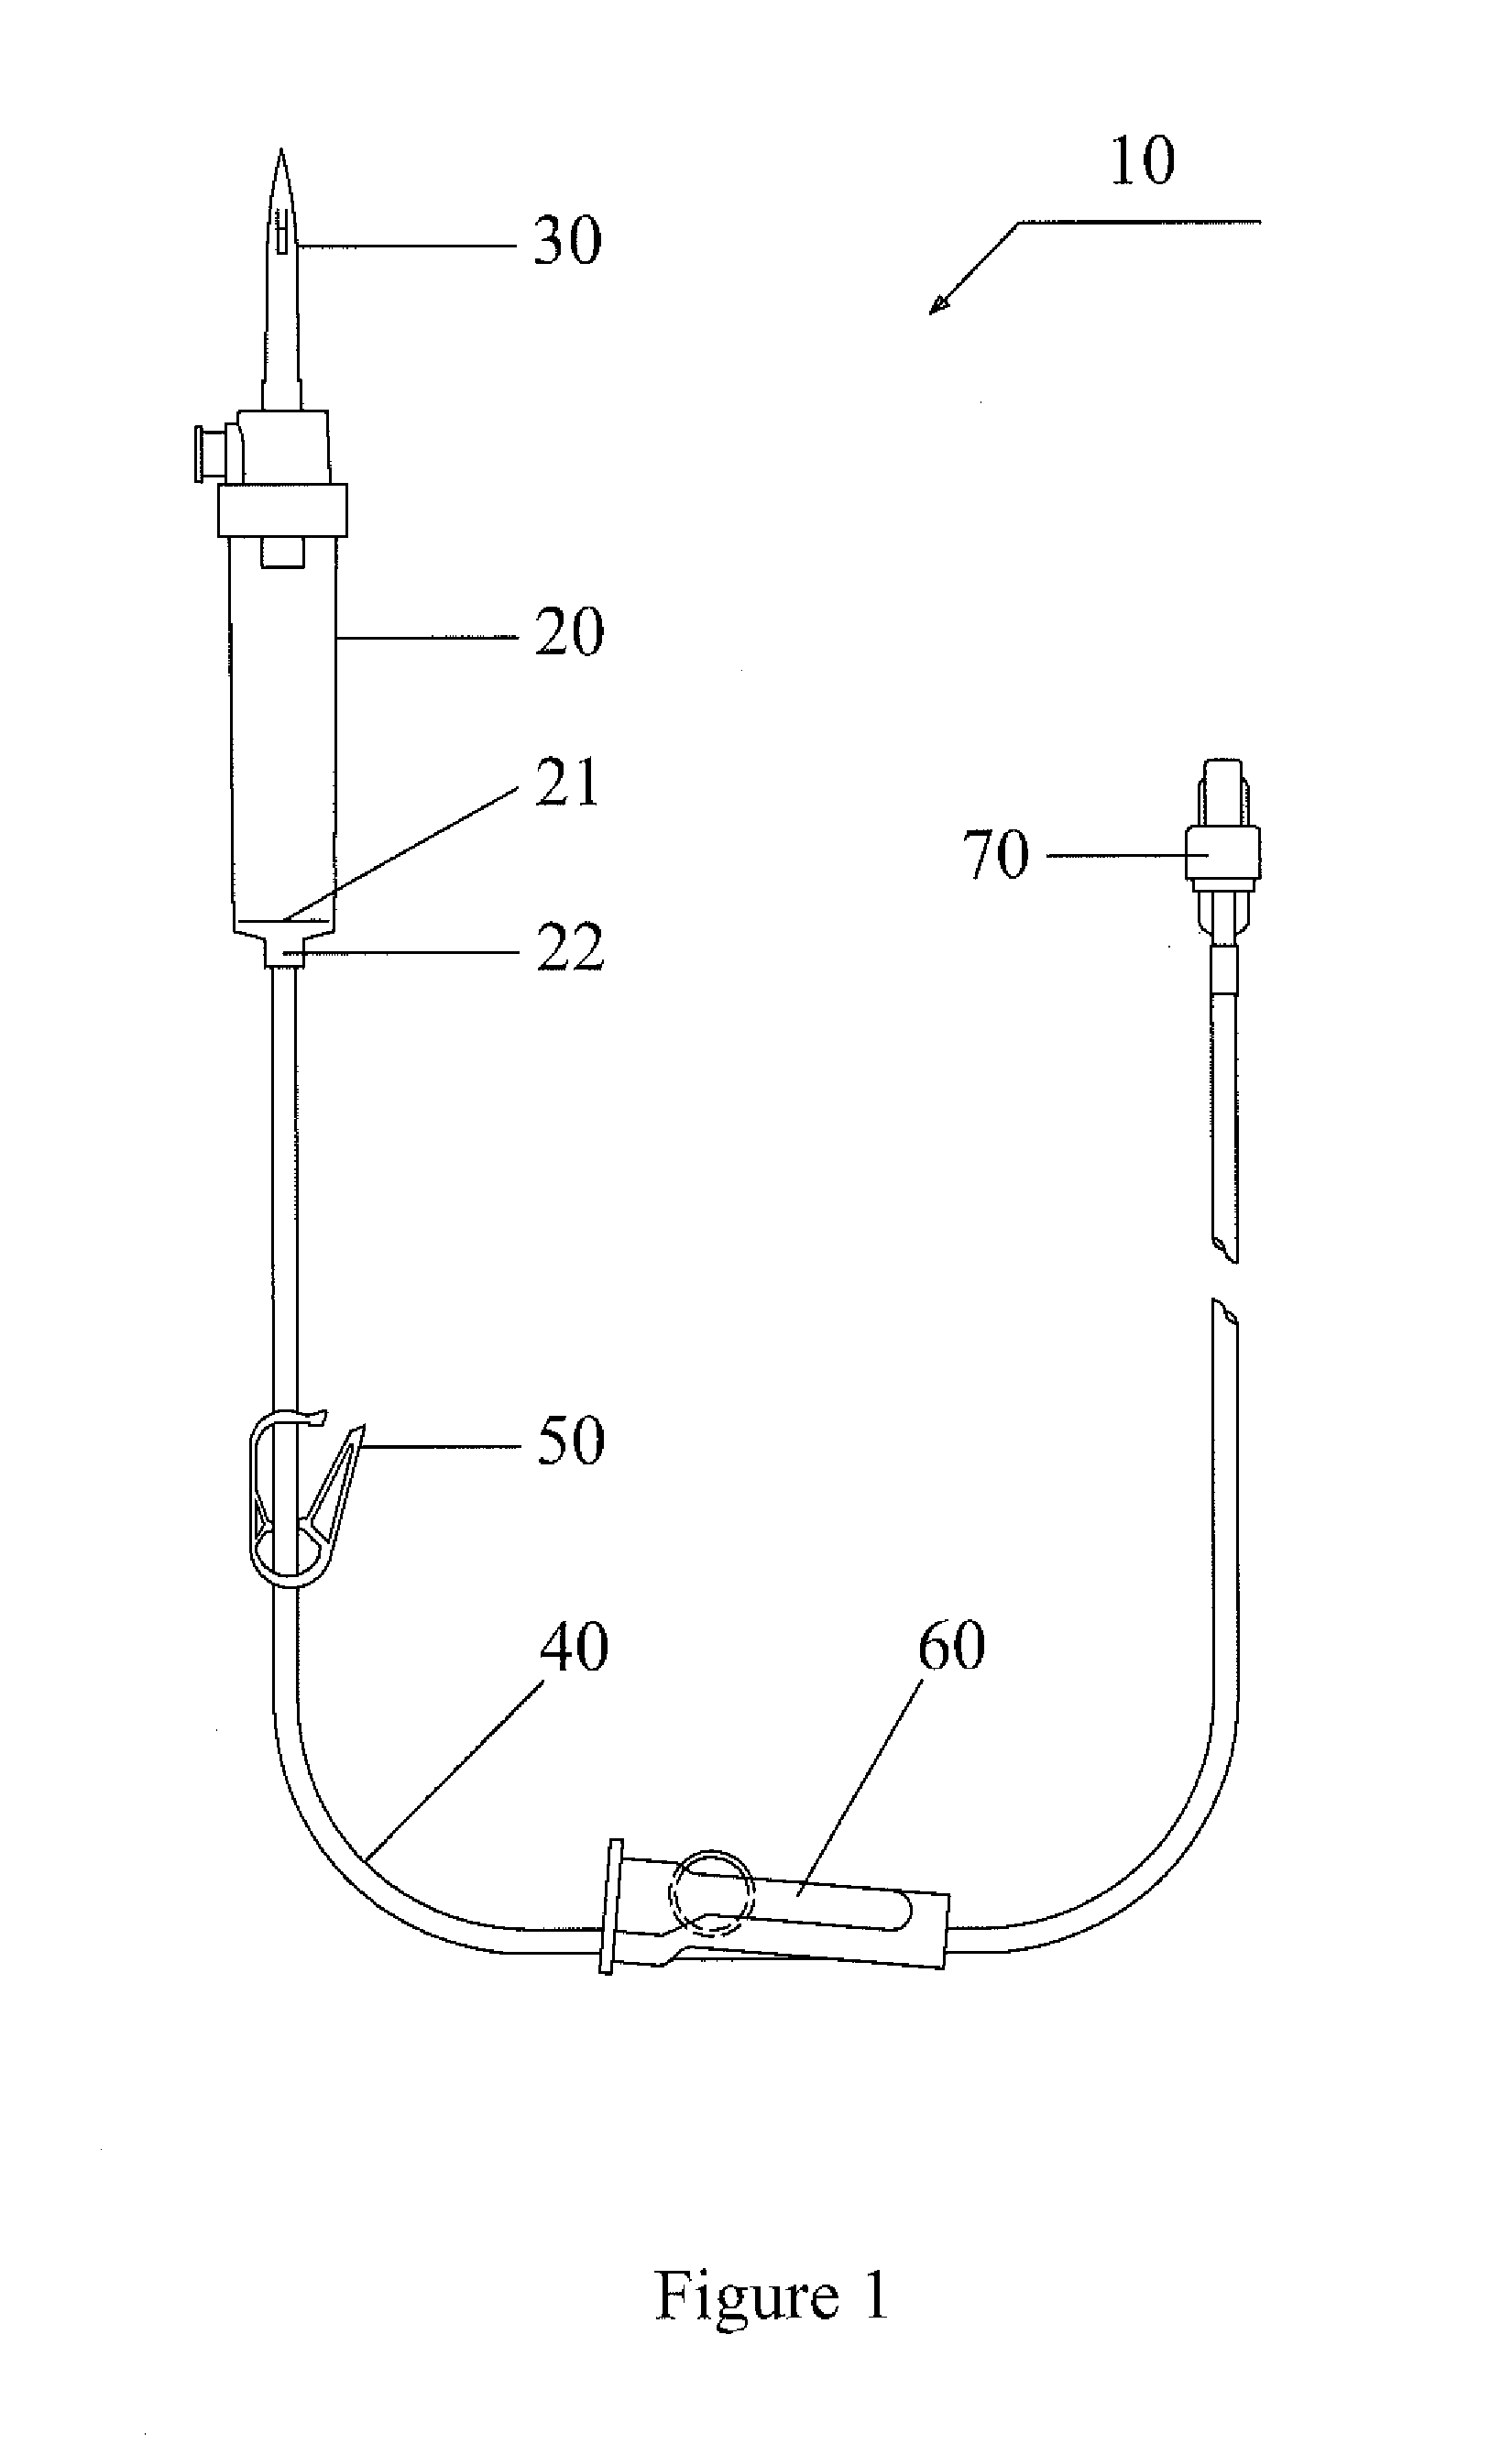 Infusion set that prevents air entry into infusion tubing